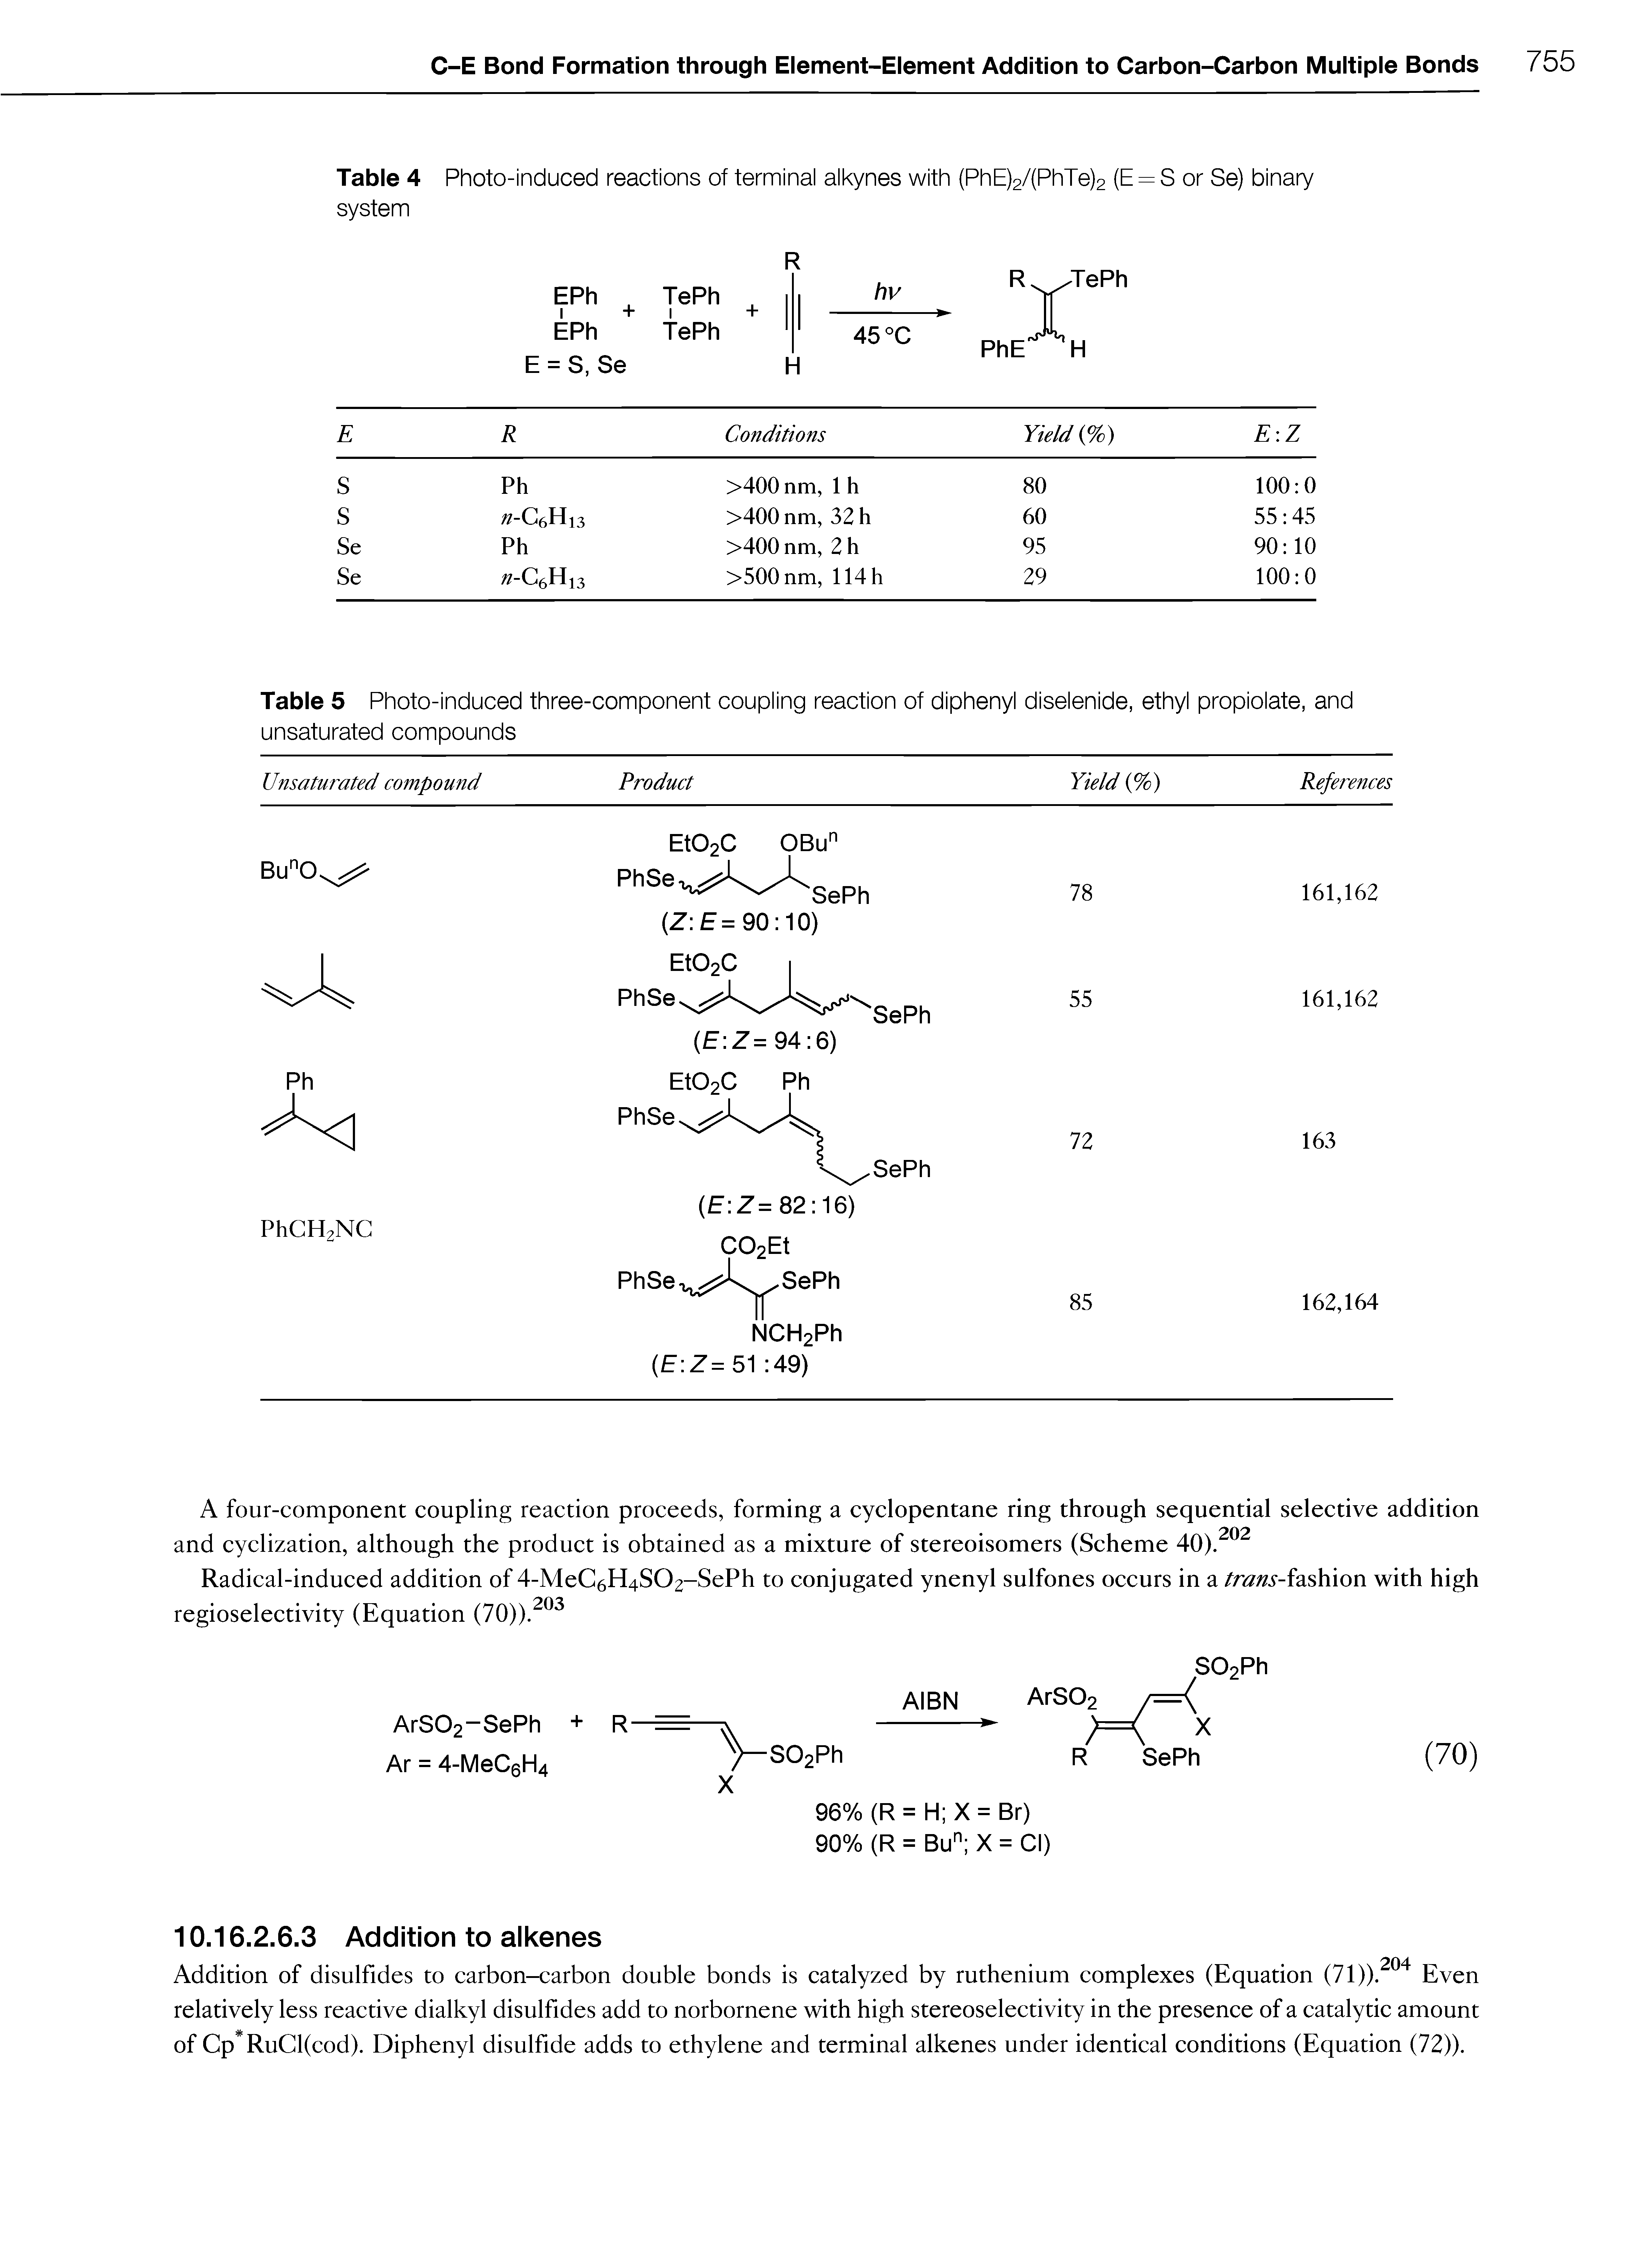 Table 5 Photo-induced three-component coupling reaction of diphenyl diselenide, ethyl propiolate, and unsaturated compounds...